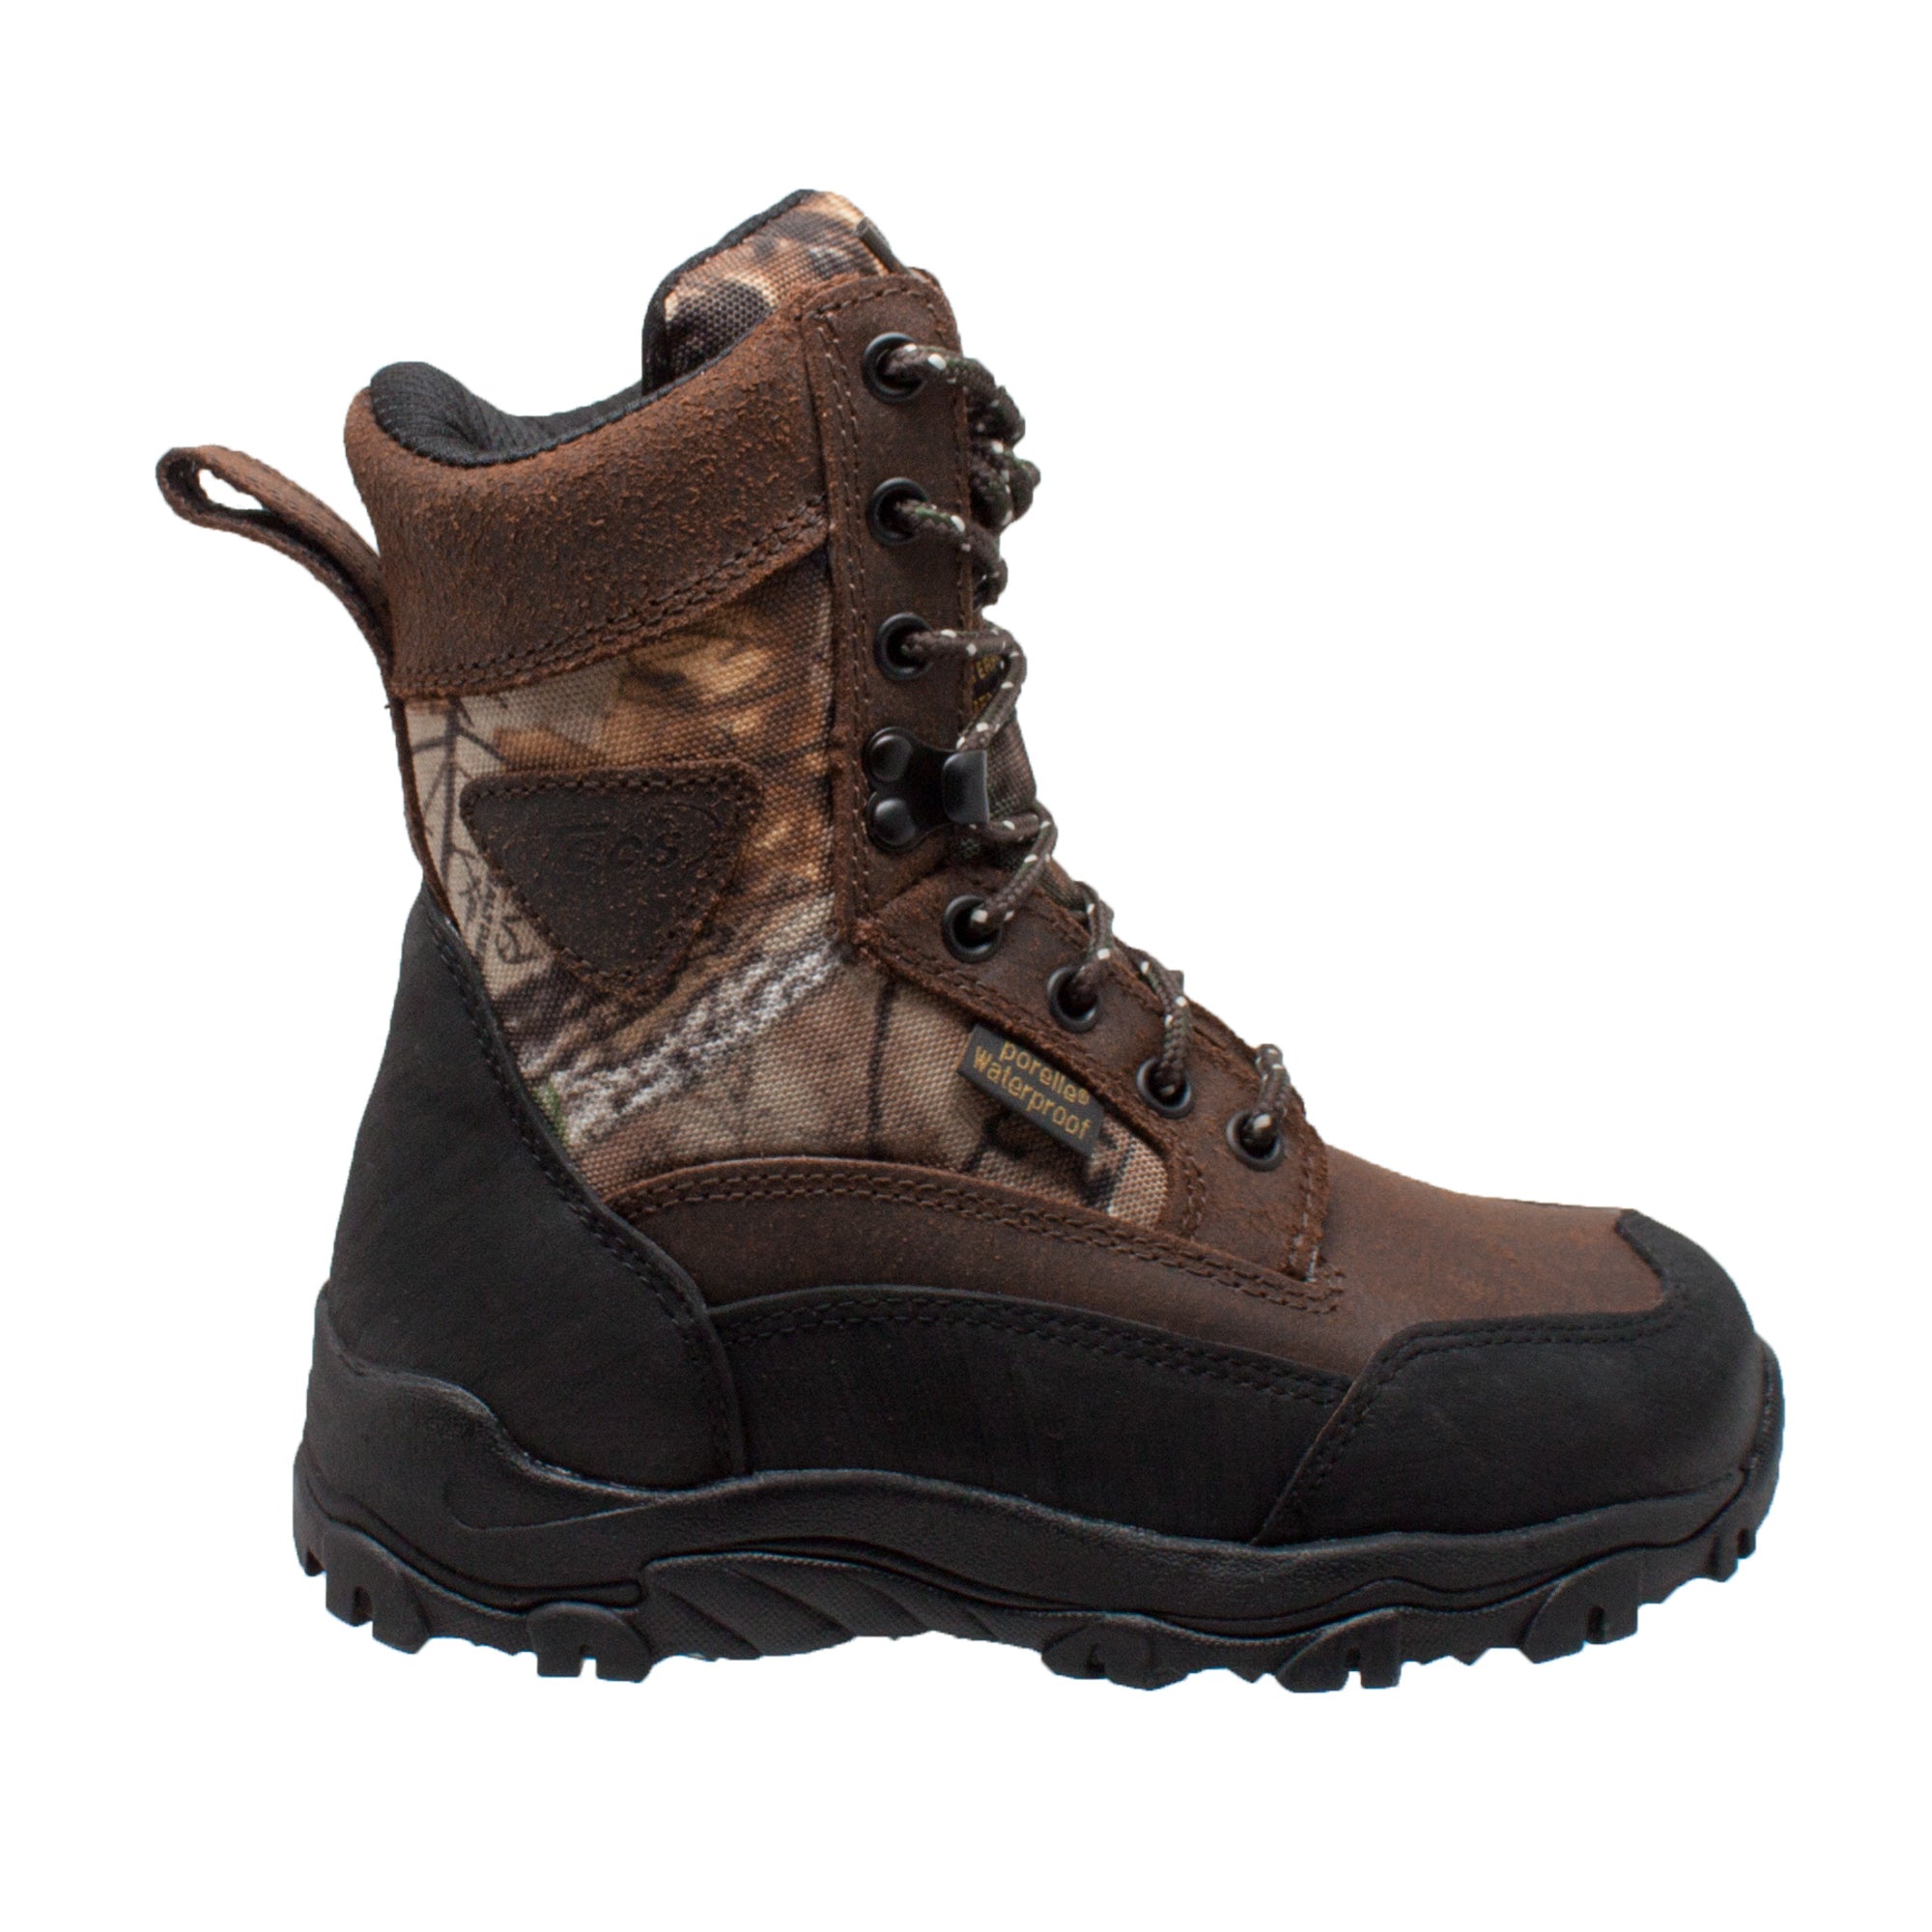 waterproof leather hunting boots